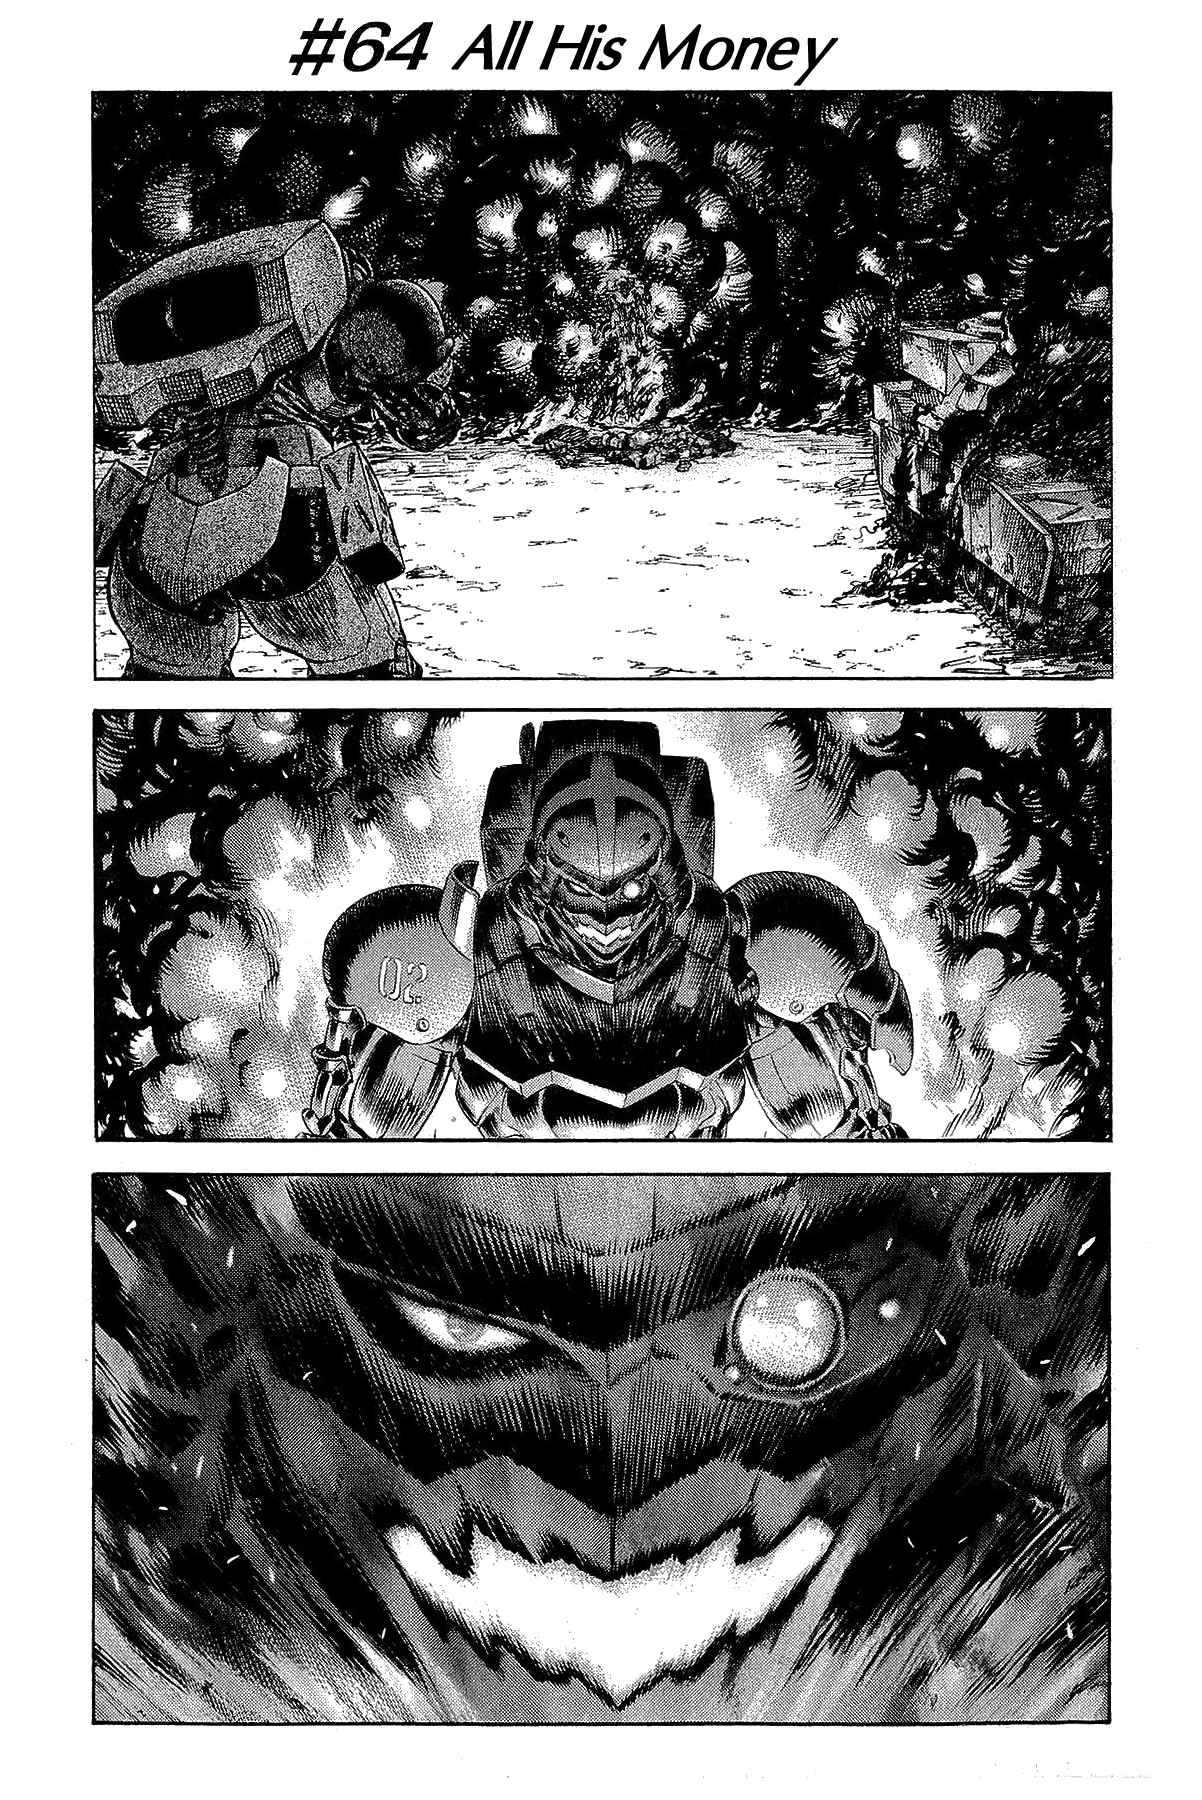 Red Eyes Vol. 16 Ch. 64 All His Money